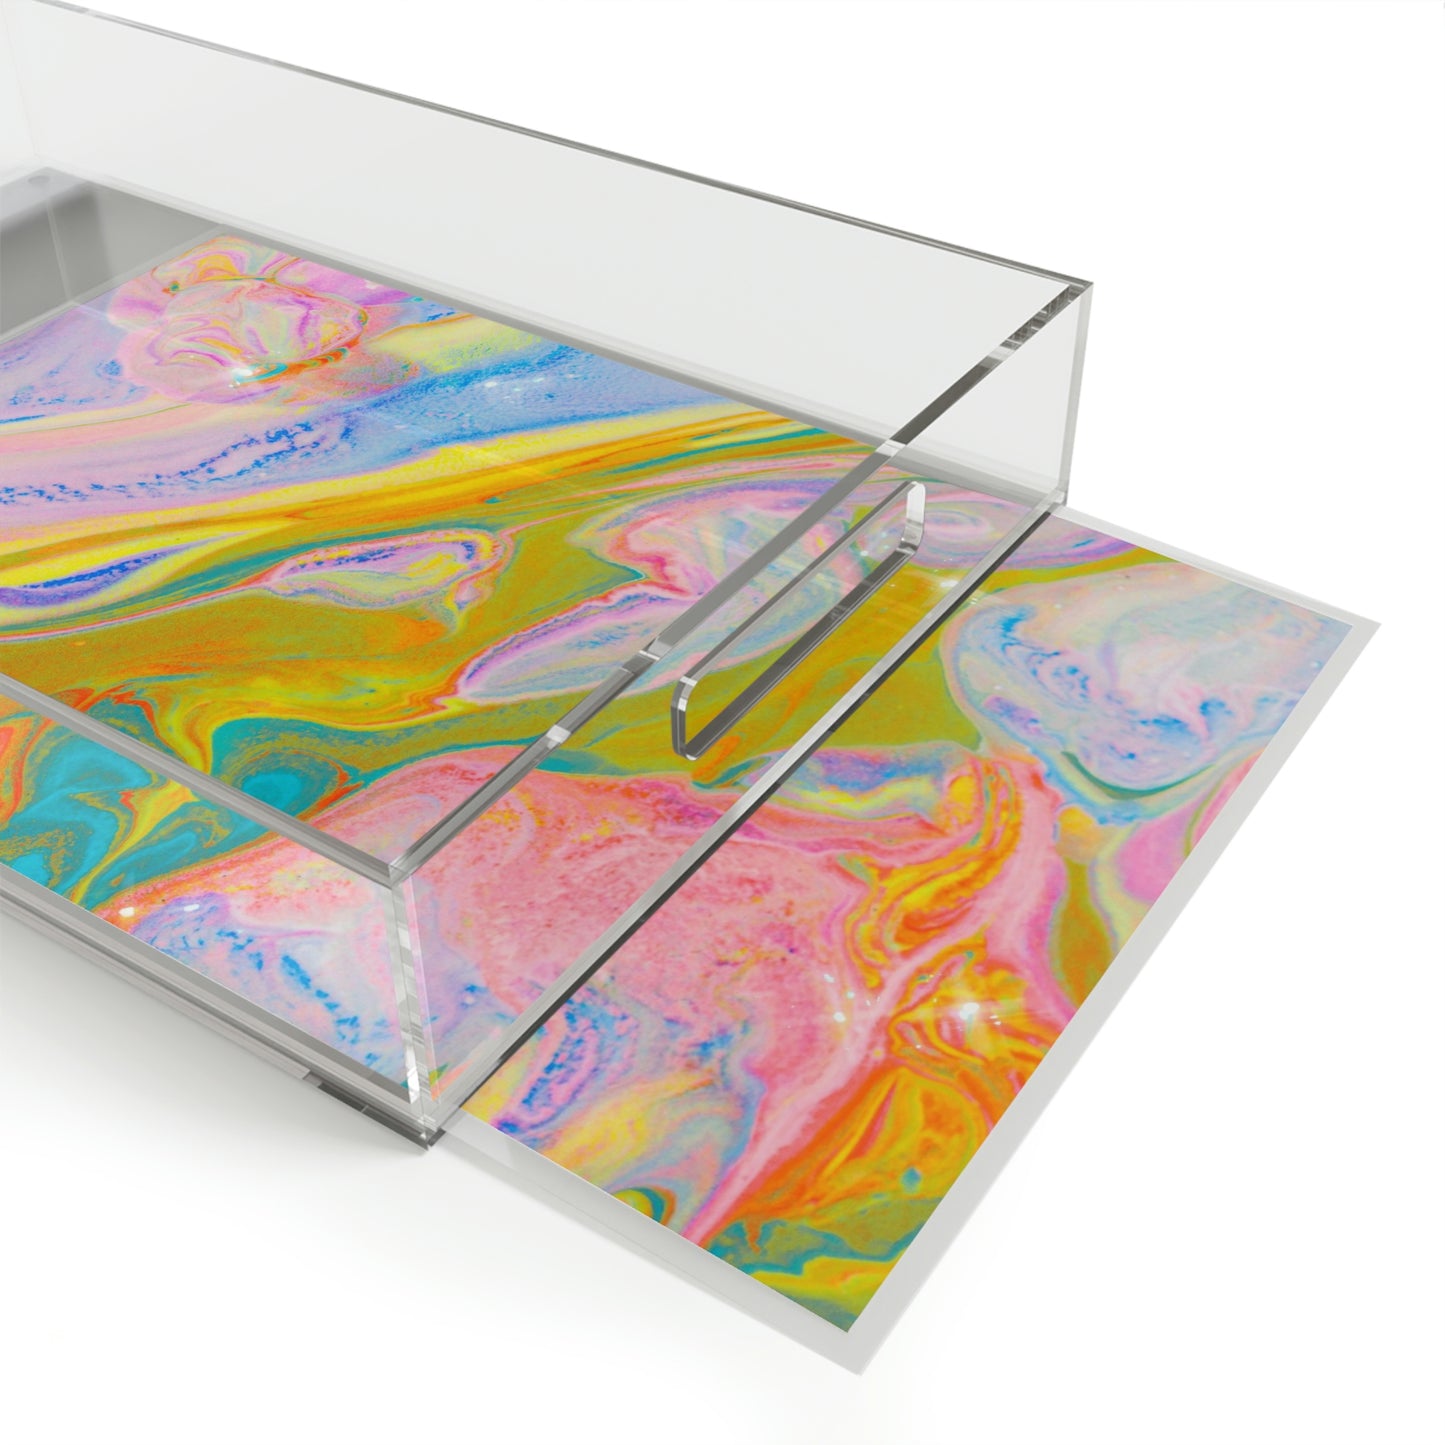 Serving Tray - Marbled - BRYKNOLO LLC Home Decor